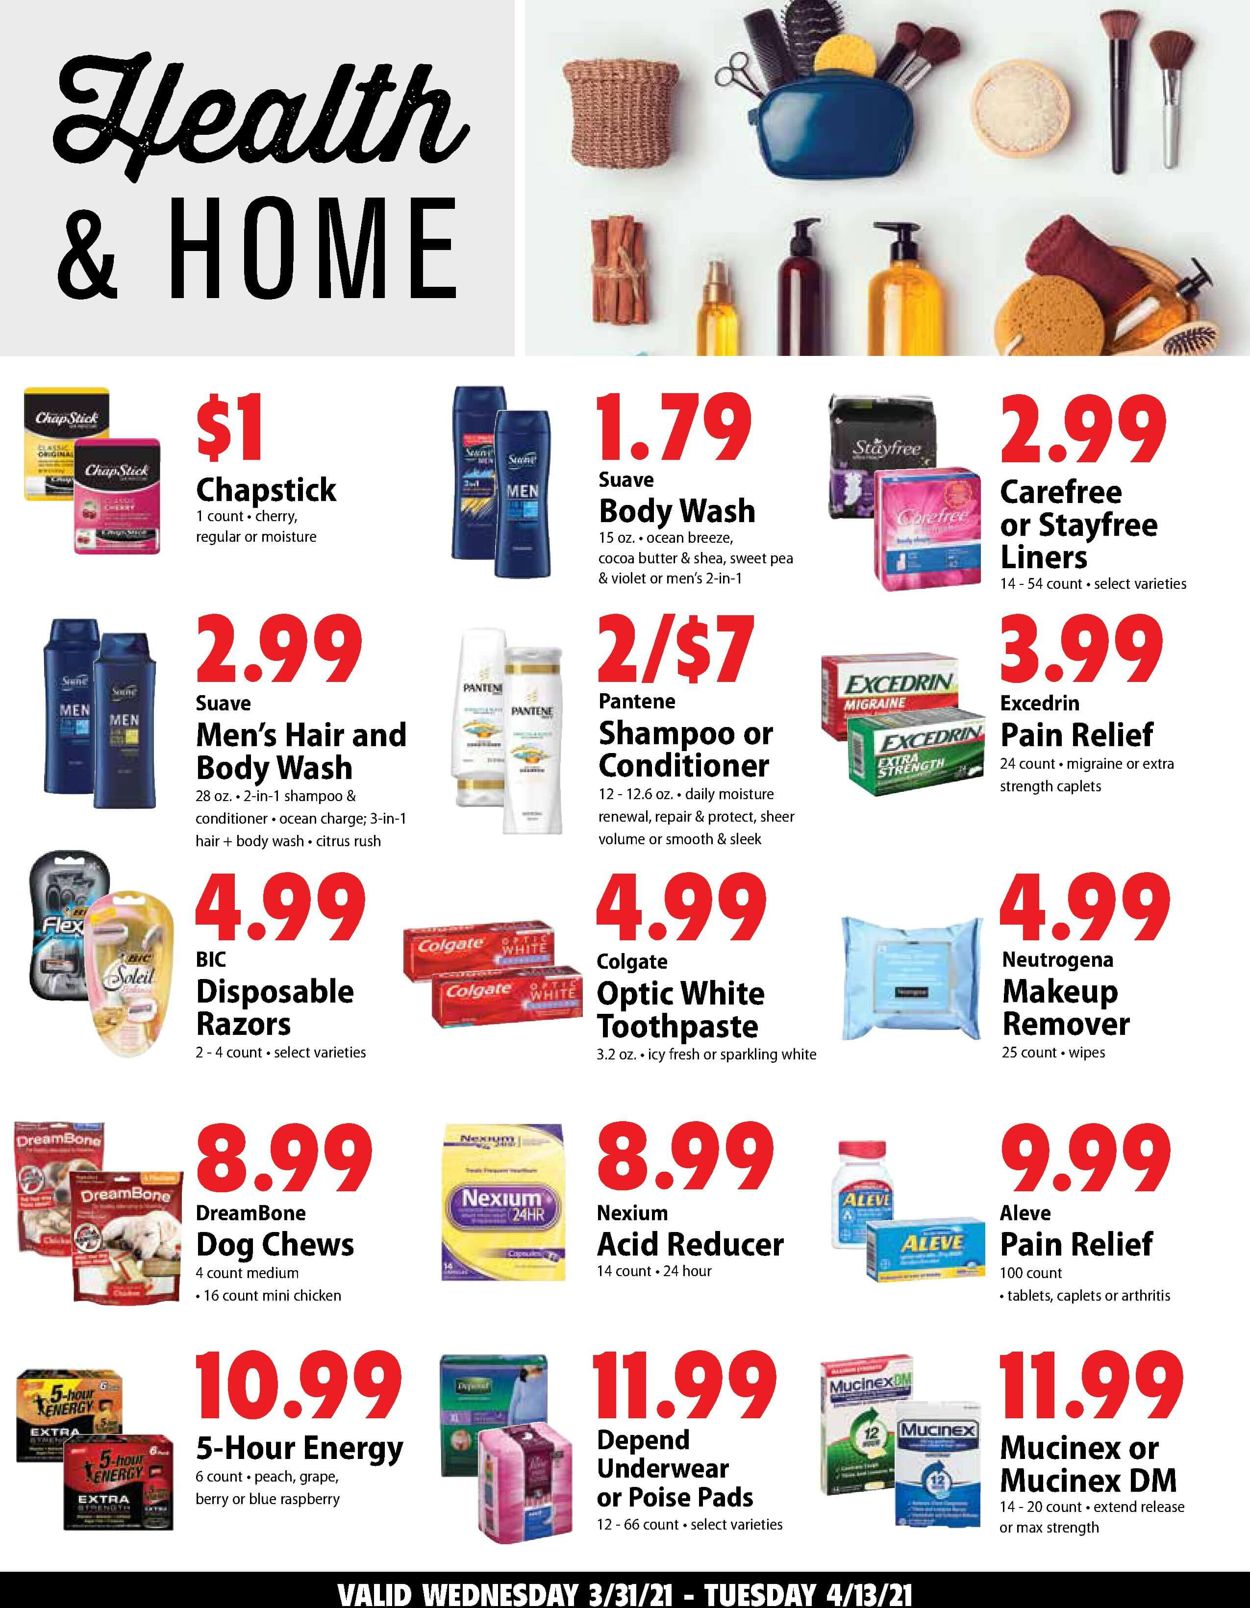 Festival Foods Easter 2021 ad Weekly Ad Circular - valid 03/31-04/06/2021 (Page 7)